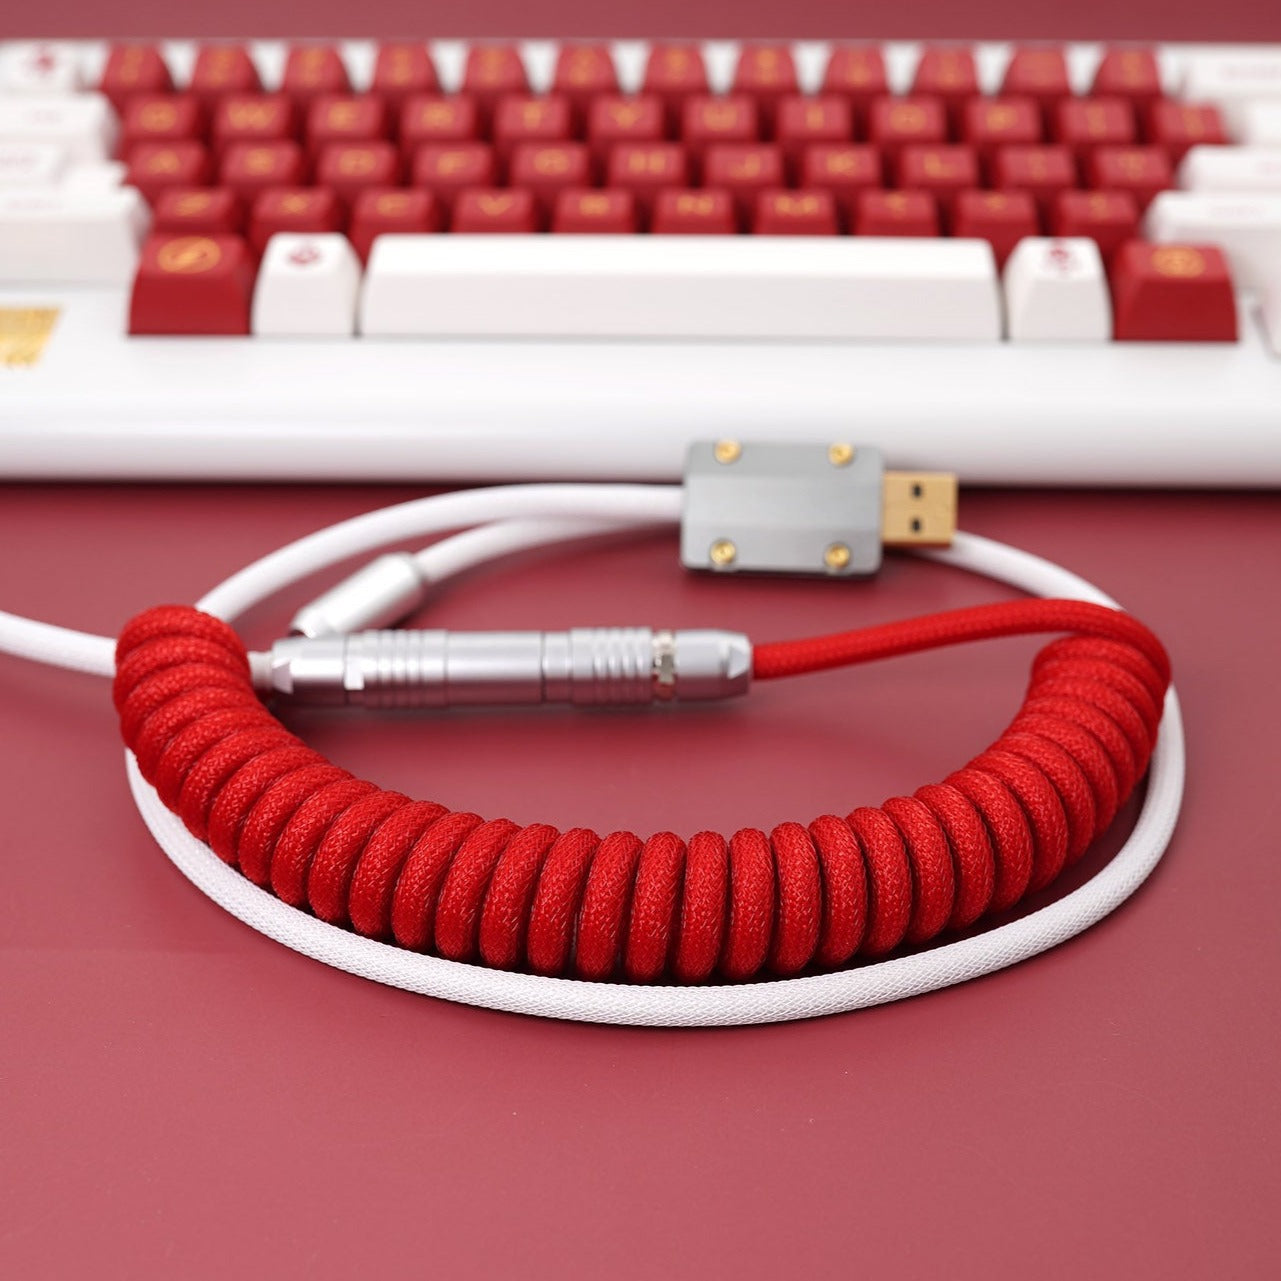 Sleeved Coiled Keyboard Aviator Cable, Lemo Style Connector - Red/White